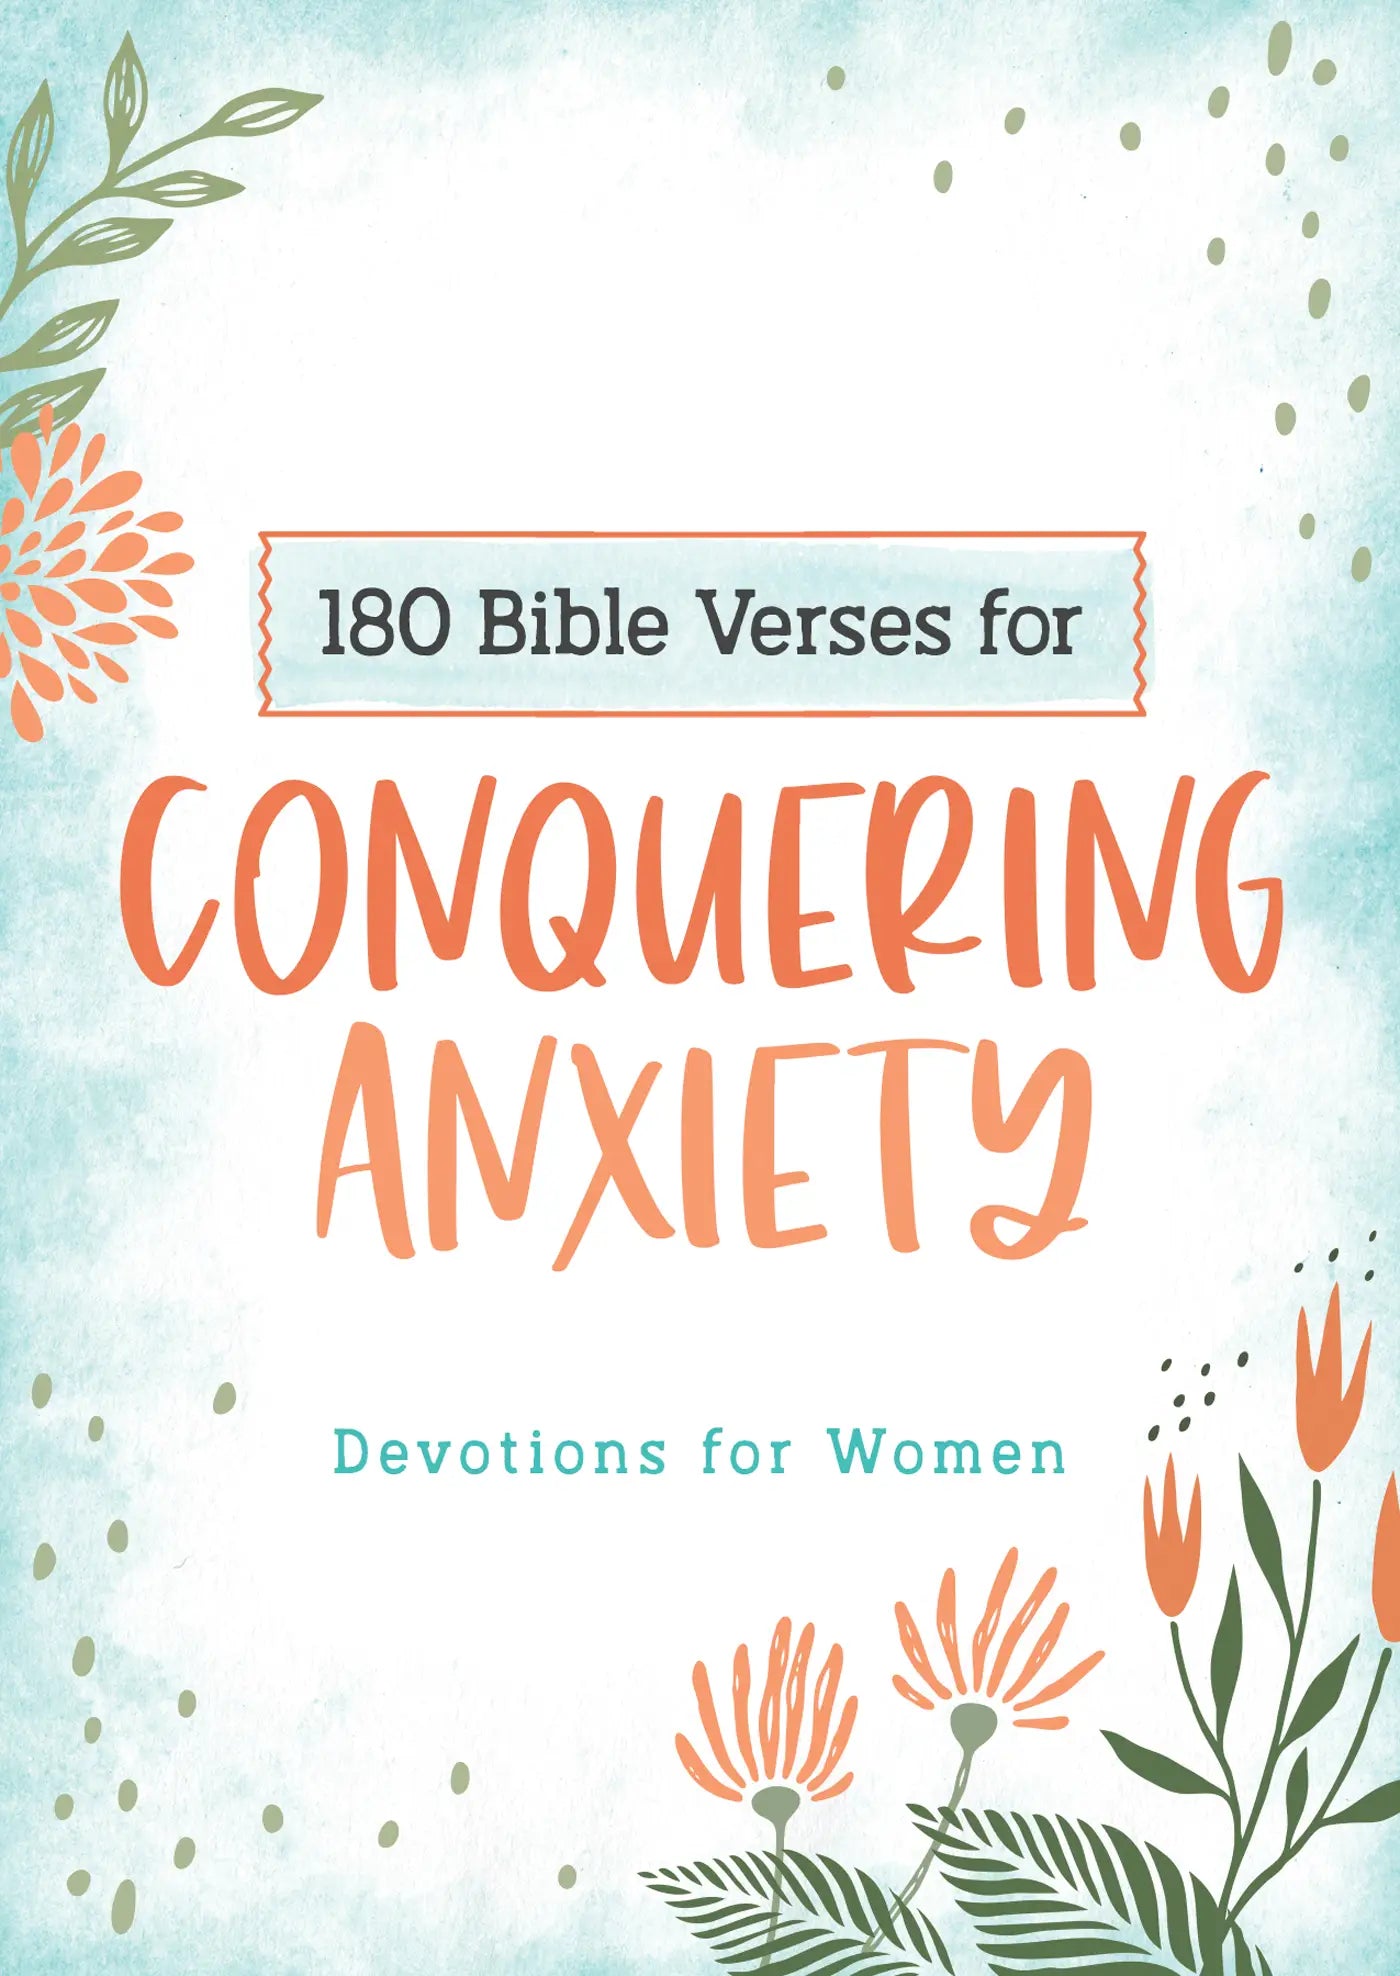 180 Bible Verses for Conquering Anxiety Devotional Book